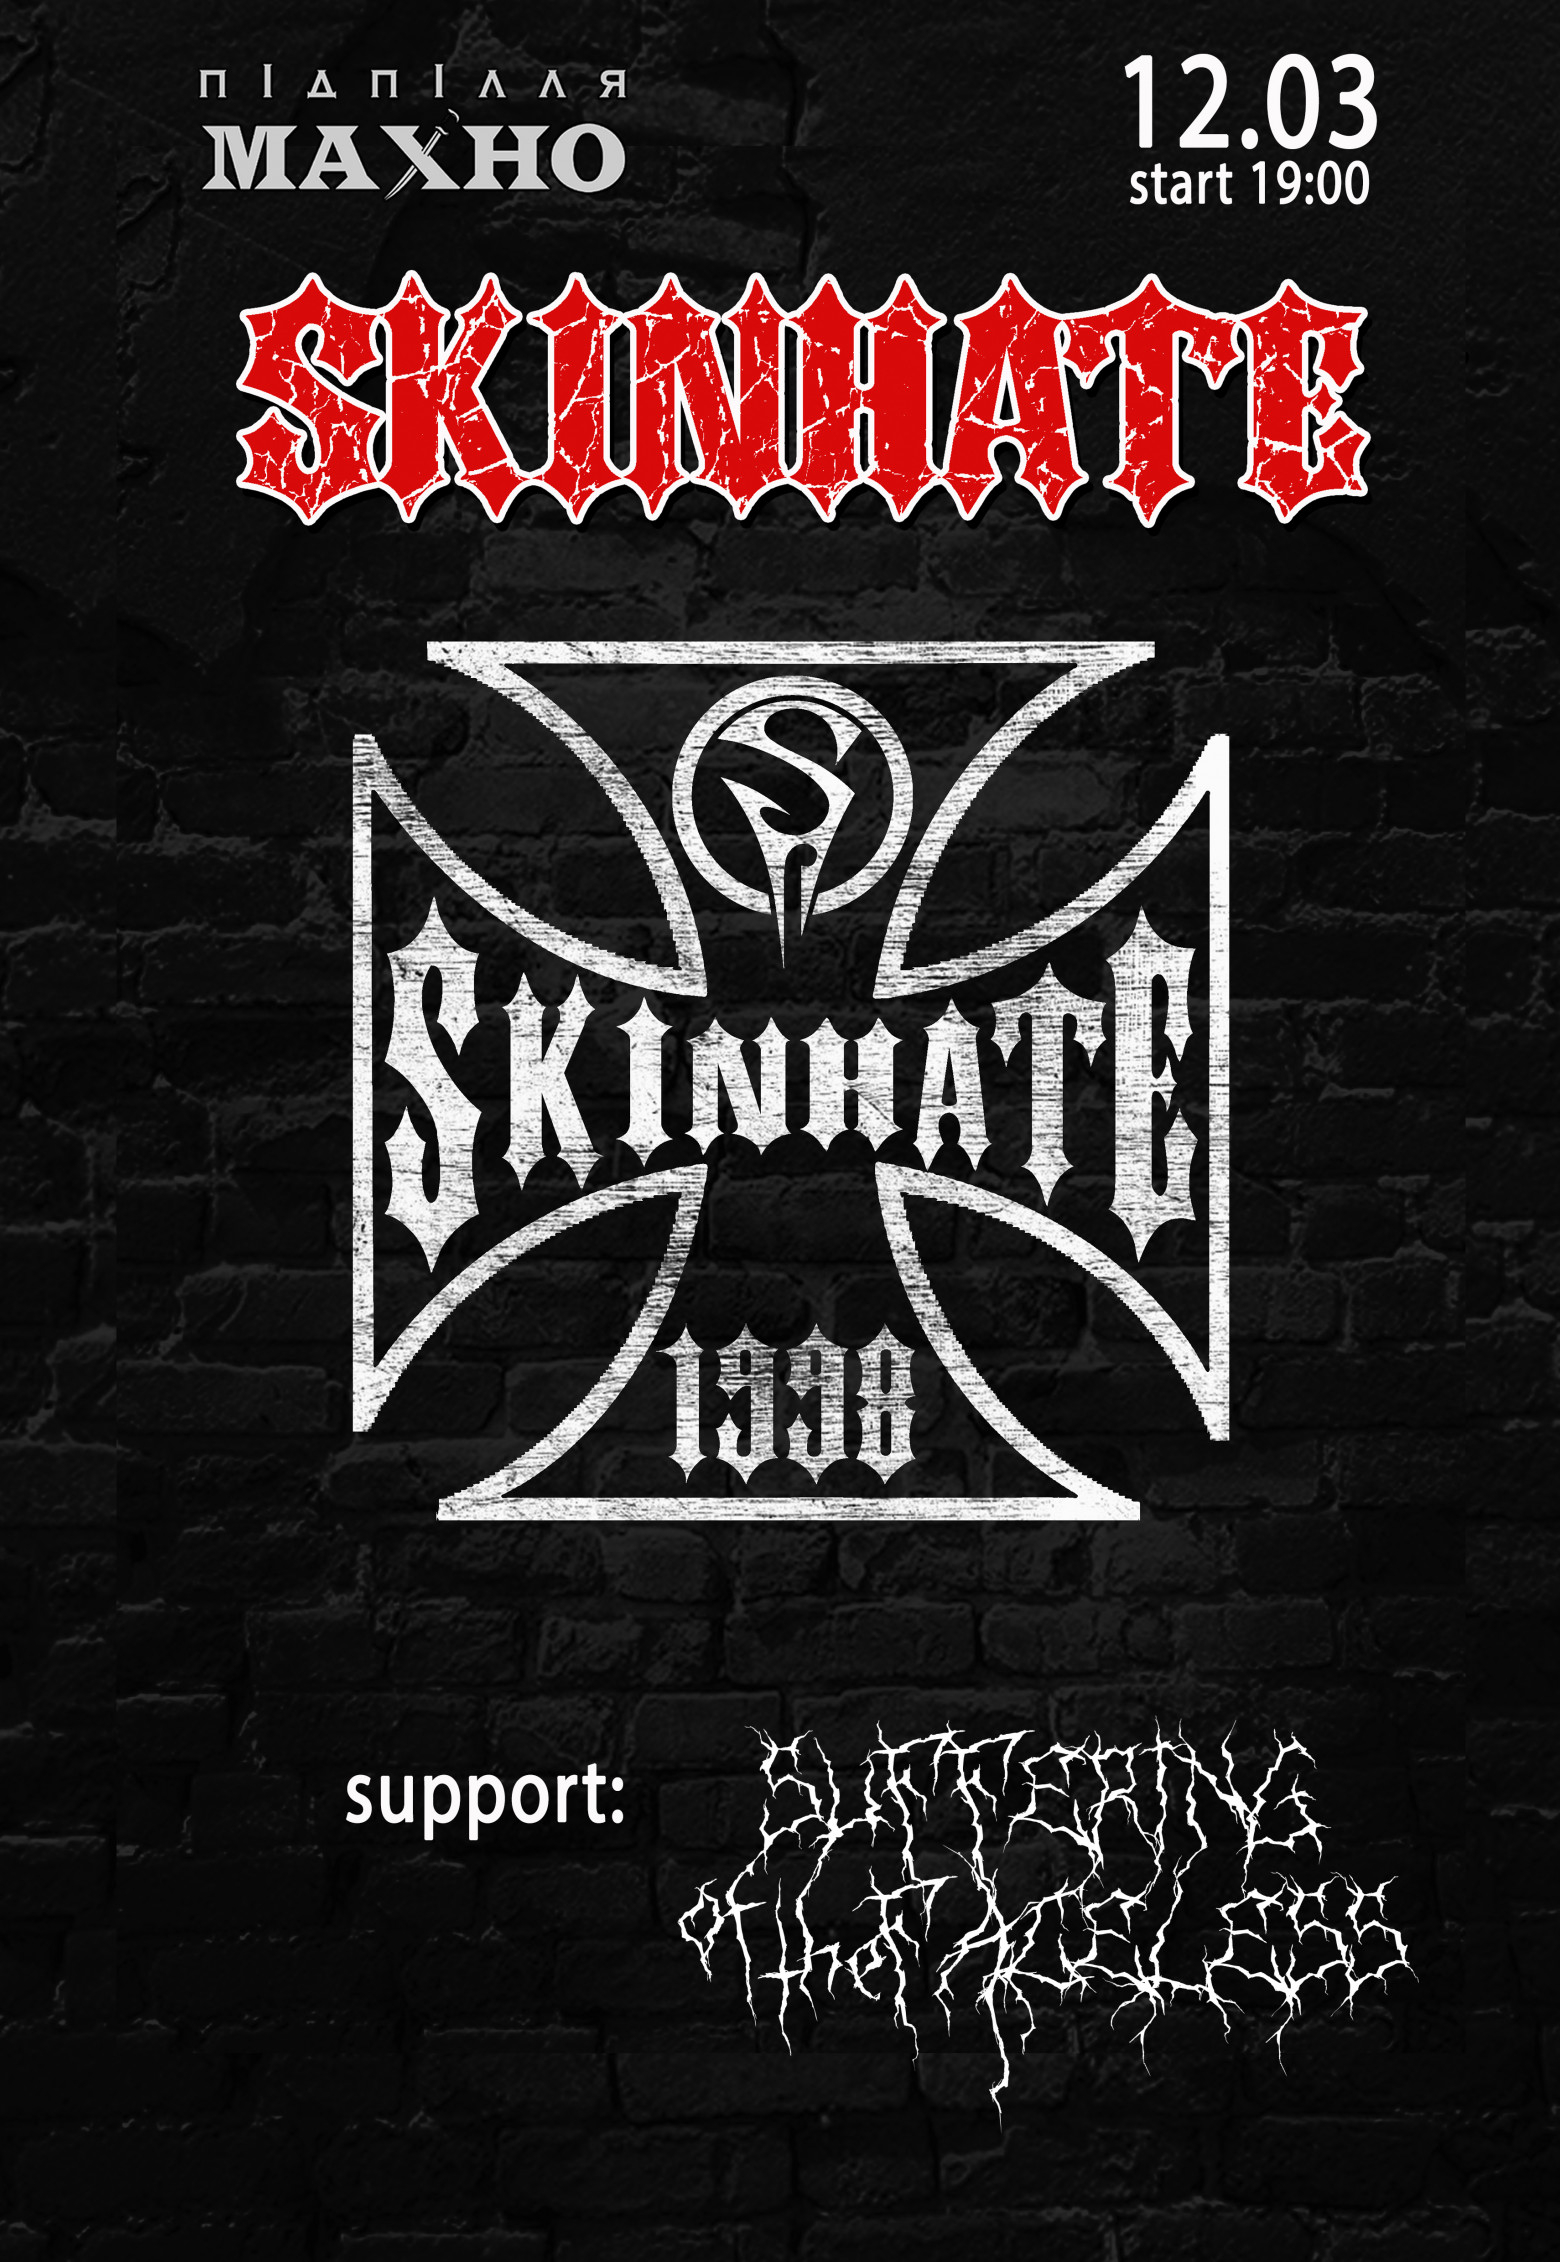 Skinhate. Support Suffering Of The Faceless Днепр, 12.03.2021. Афиша Днепра